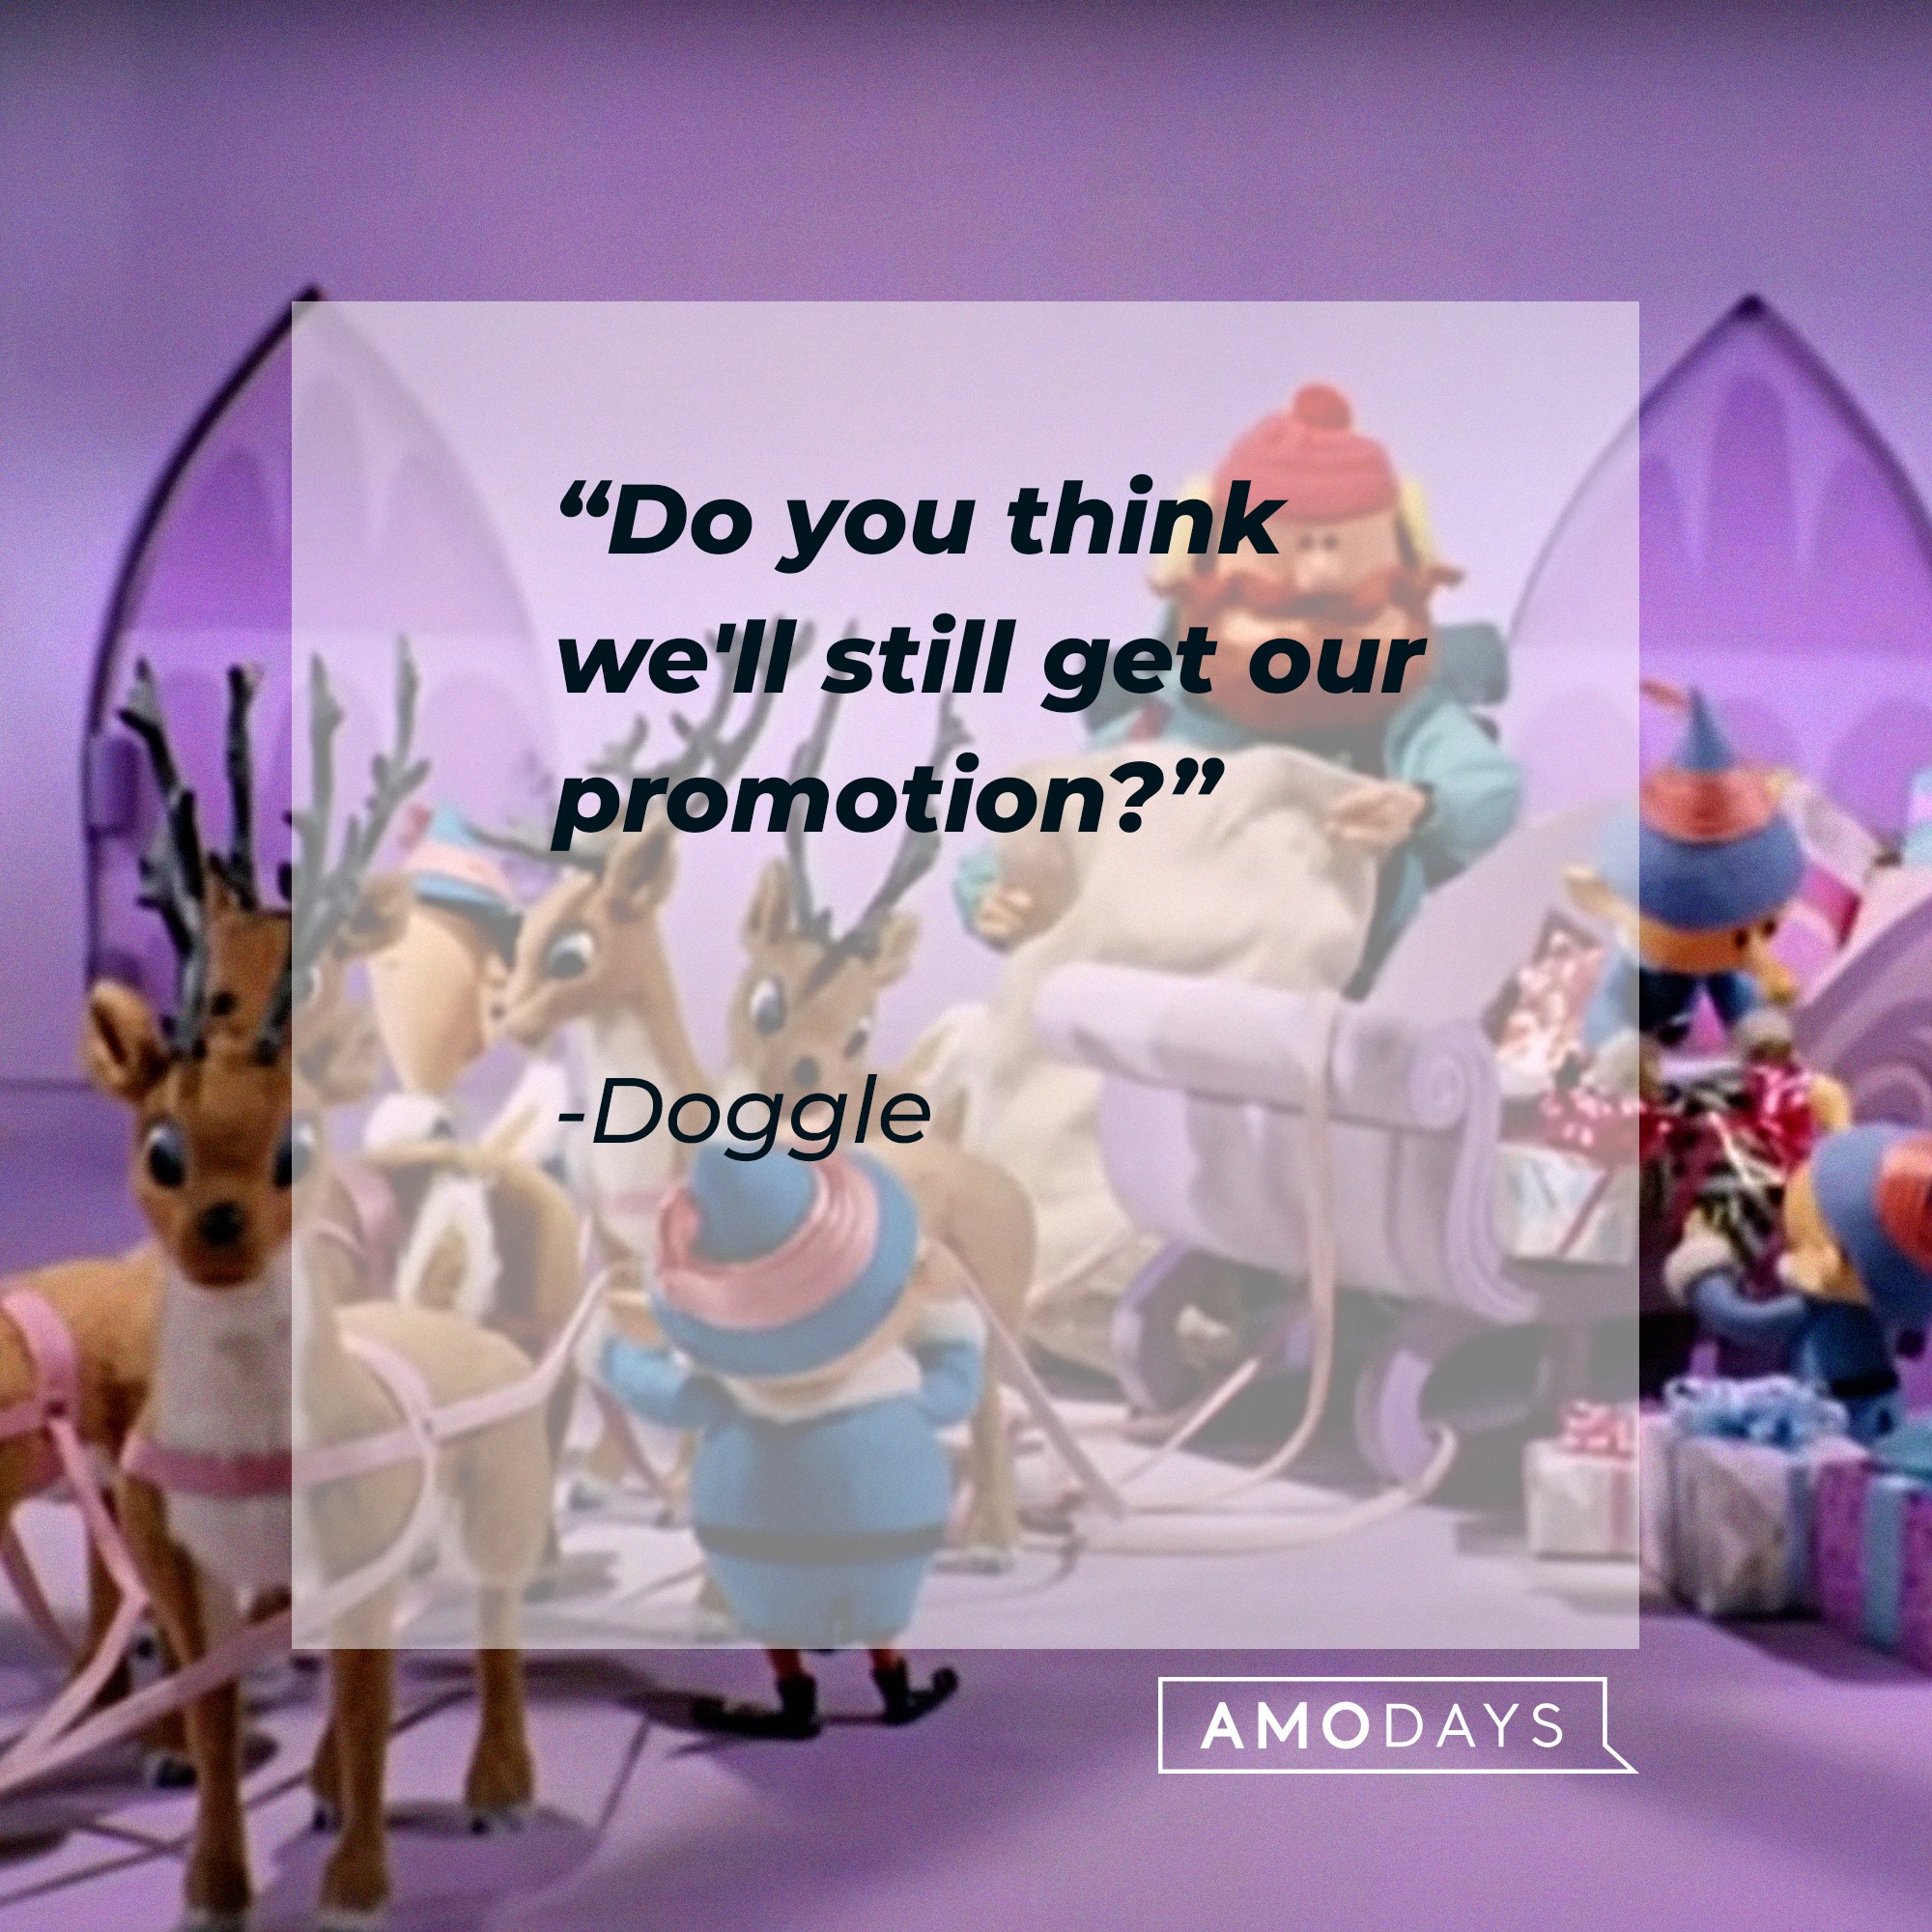 Doggle: "Do you think we'll still get our promotion?" | Source: facebook.com/Rudolph the Red-Nosed Reindeer